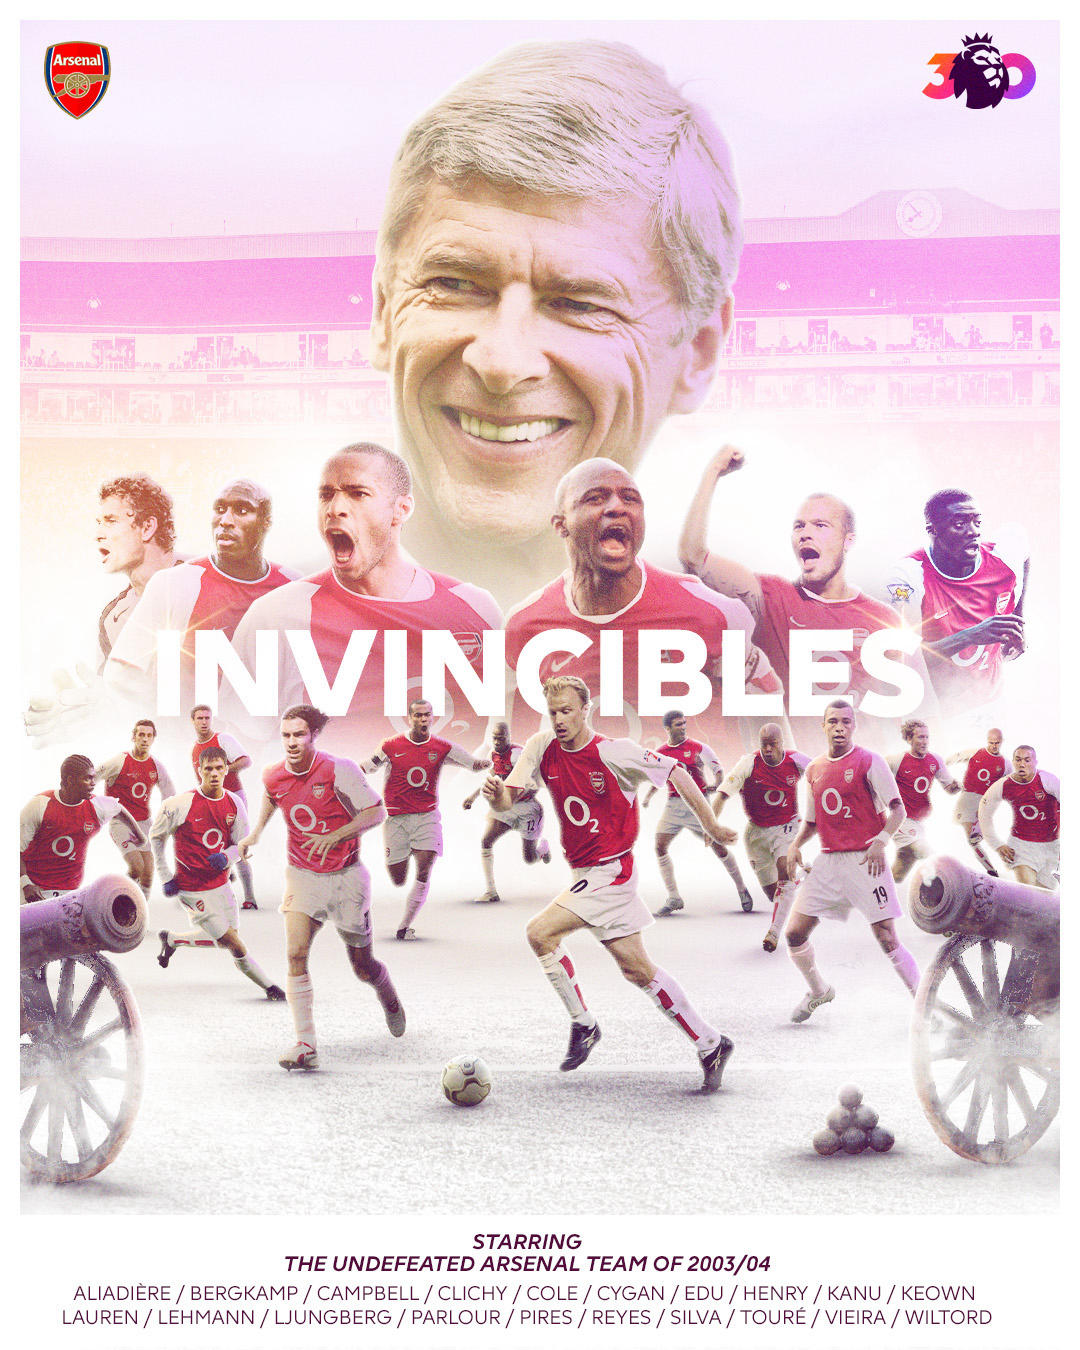 Premier League - The Invincibles will forever be etched into football history